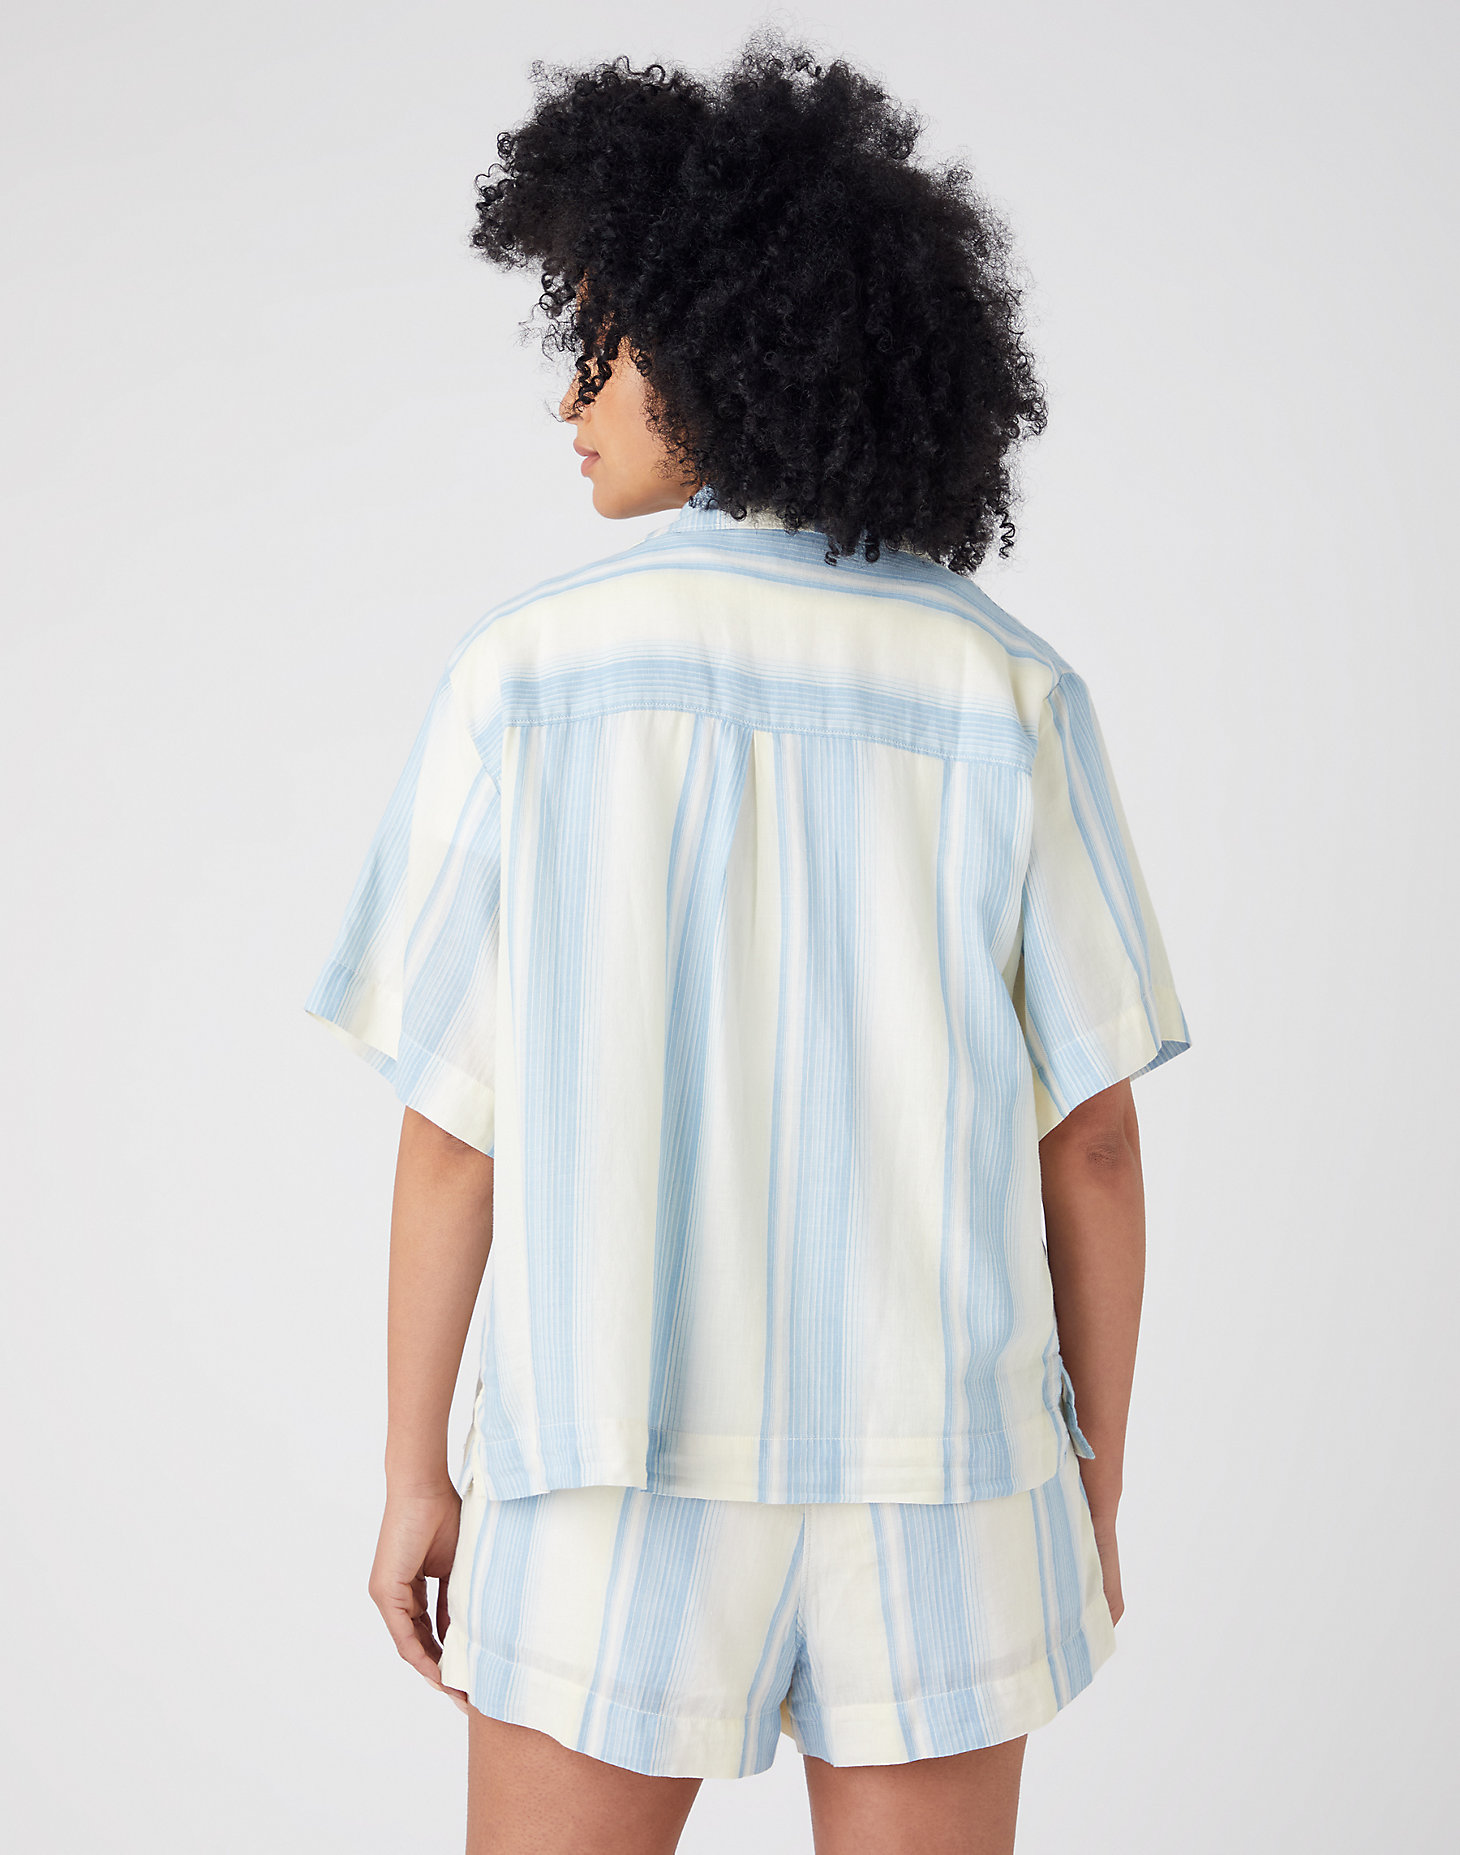 Oversized Resort Shirt in Omphalodes Blue alternative view 2